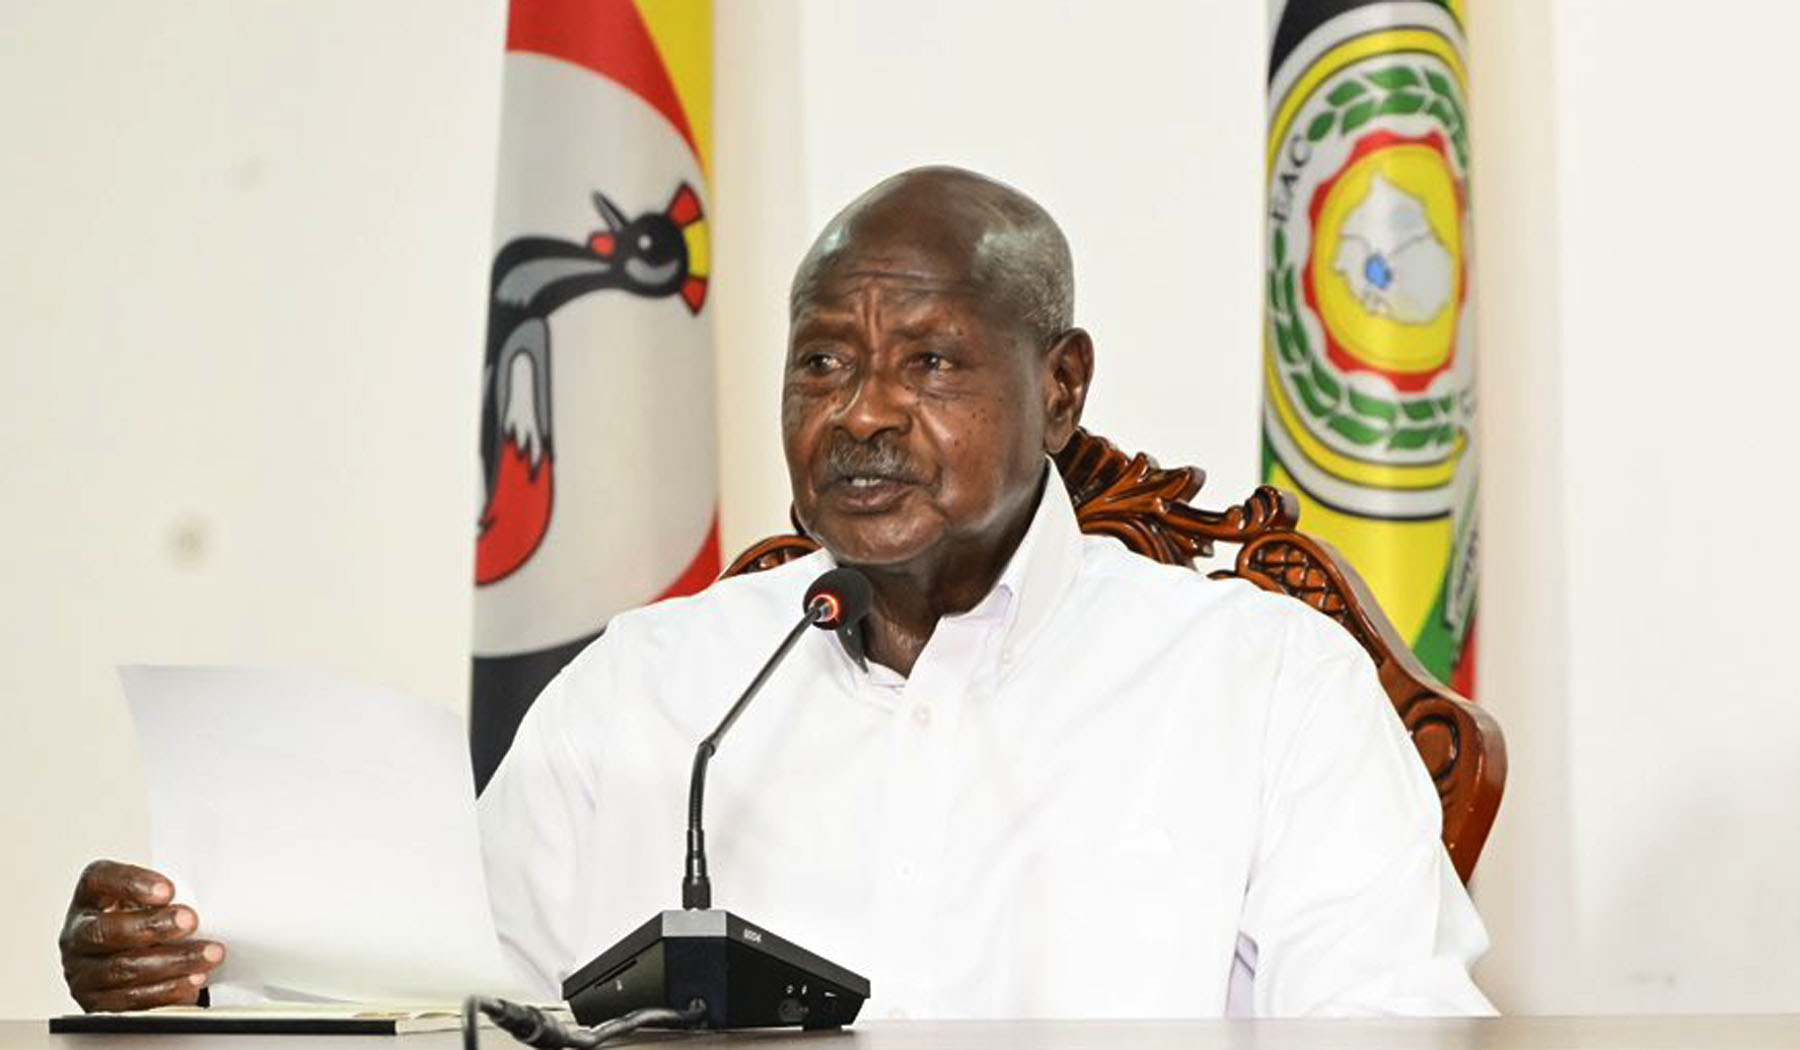 The president of Uganda suspended the use of Electronic Fiscal Receipting and Invoicing Solution (EFRIS).